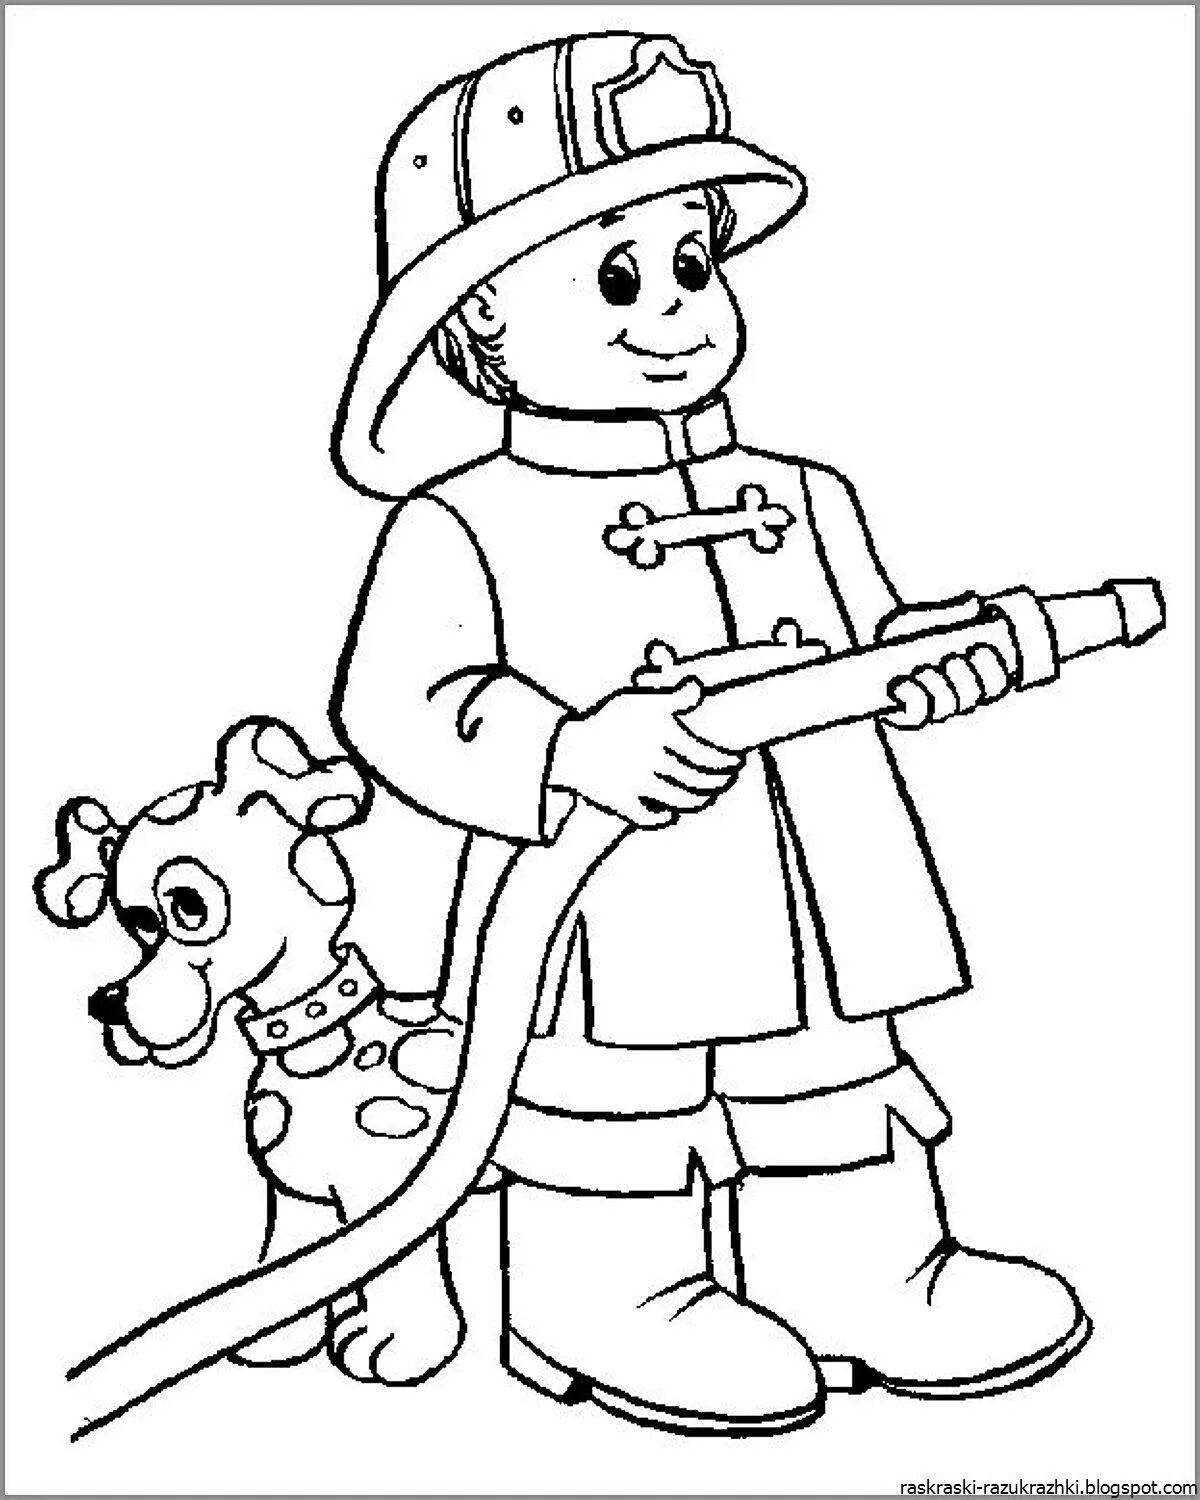 Colorful fireman coloring book for kids